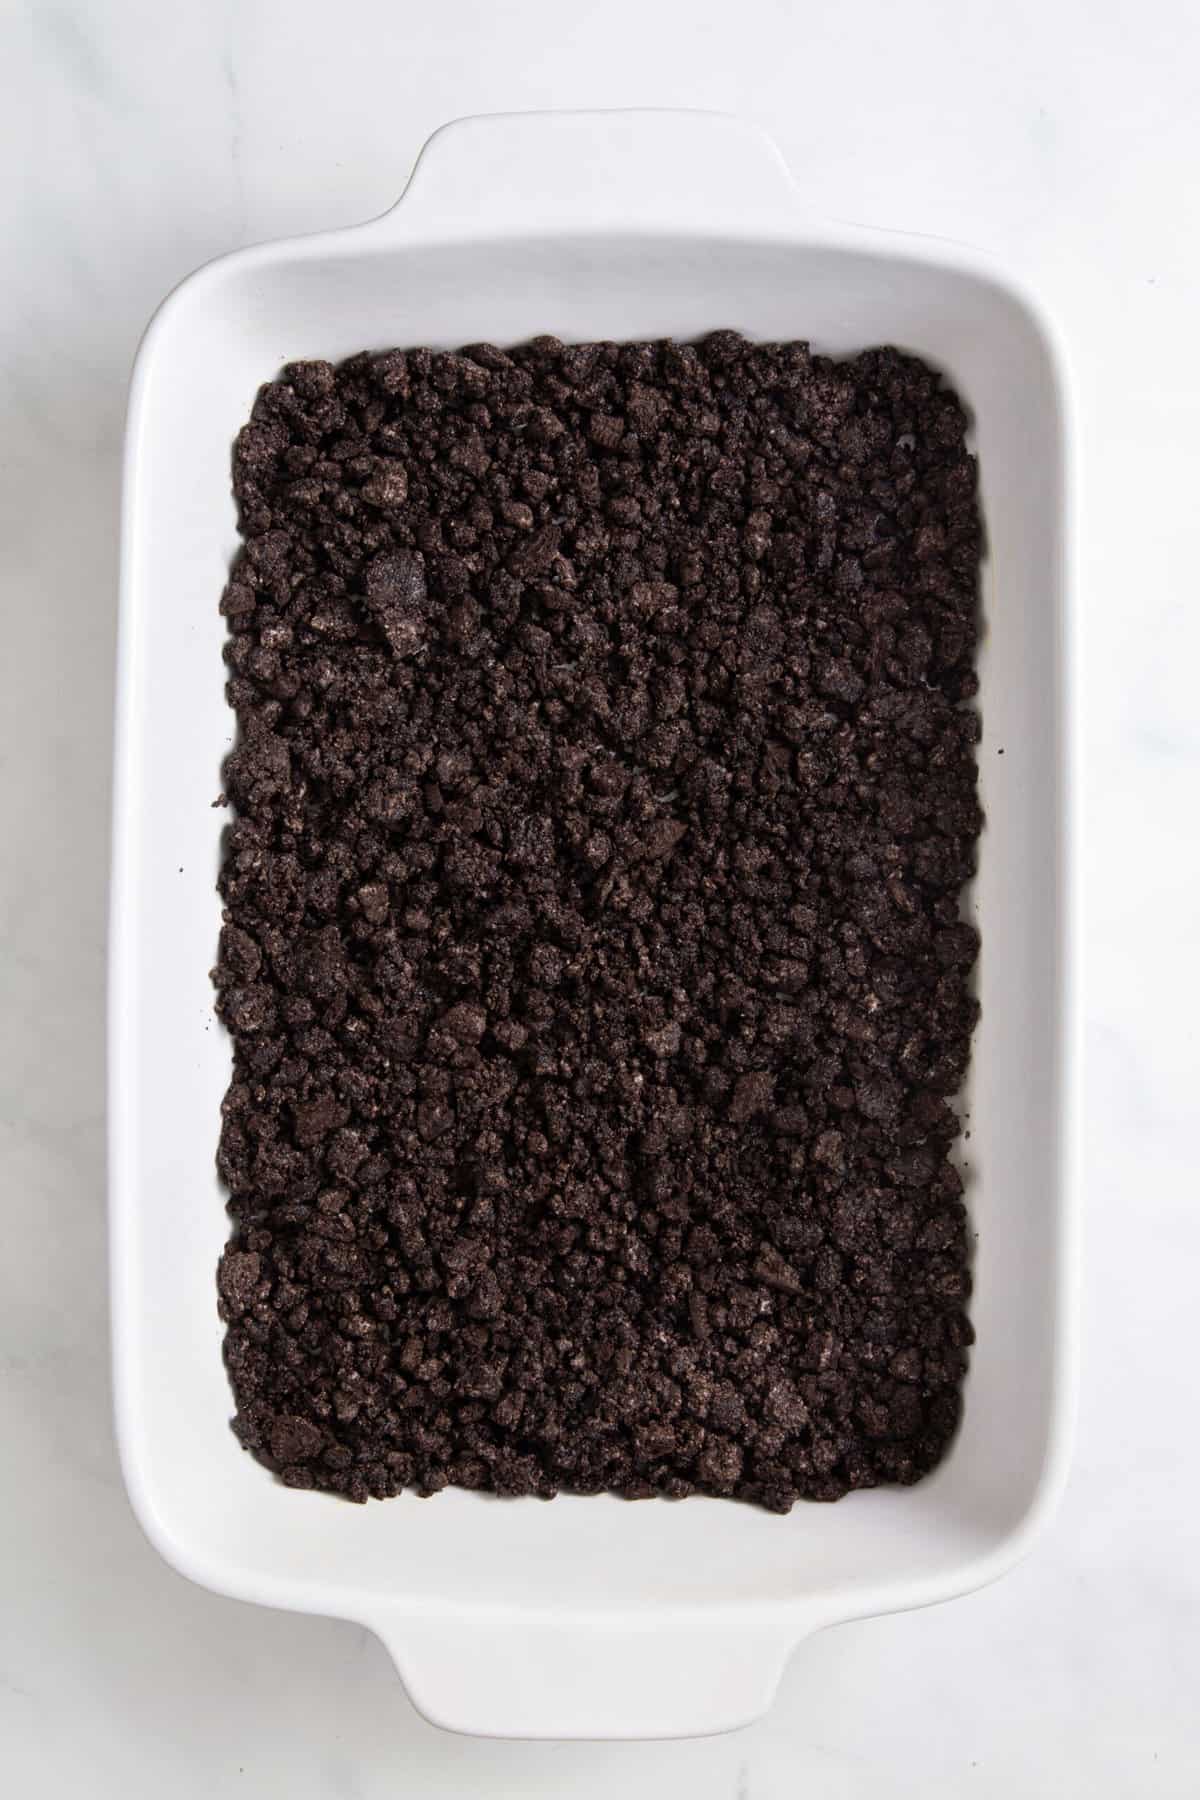 crushed oreo crumbs sitting in a 9x13 casserole dish